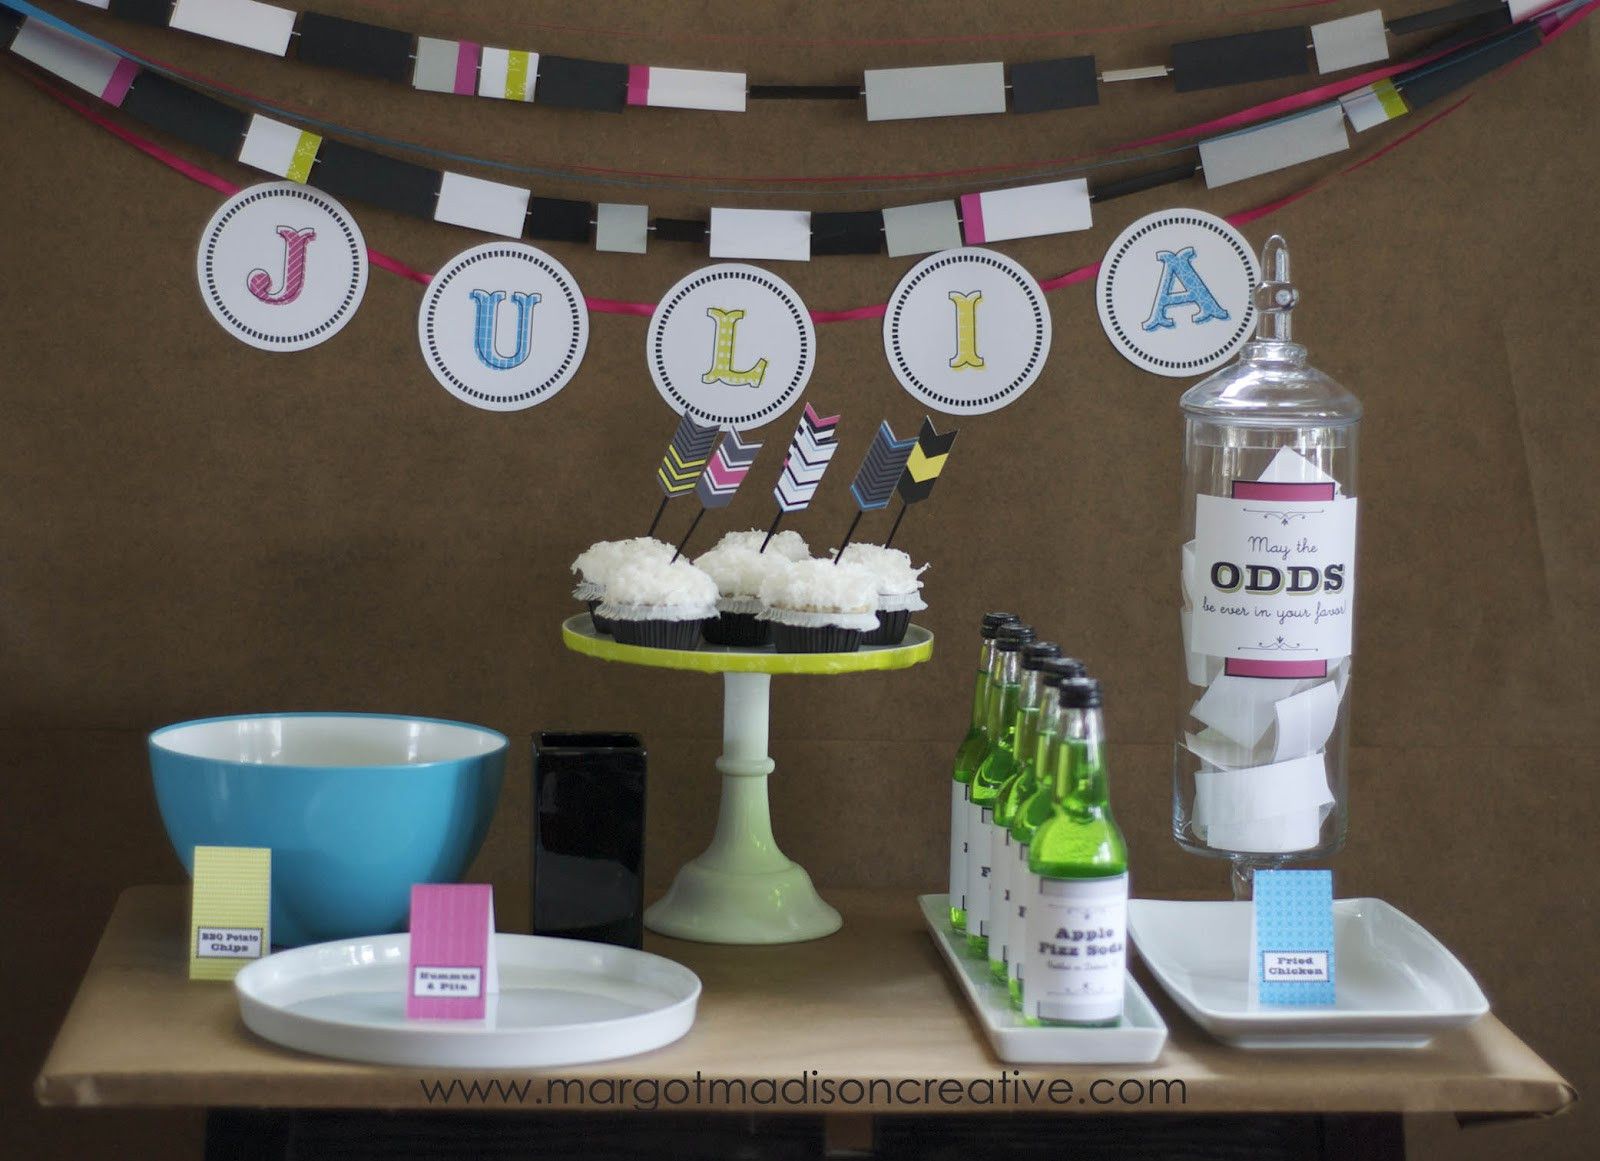 Hunger Games Birthday Party Ideas
 MargotMadison Set up for a Hunger Games Birthday Party